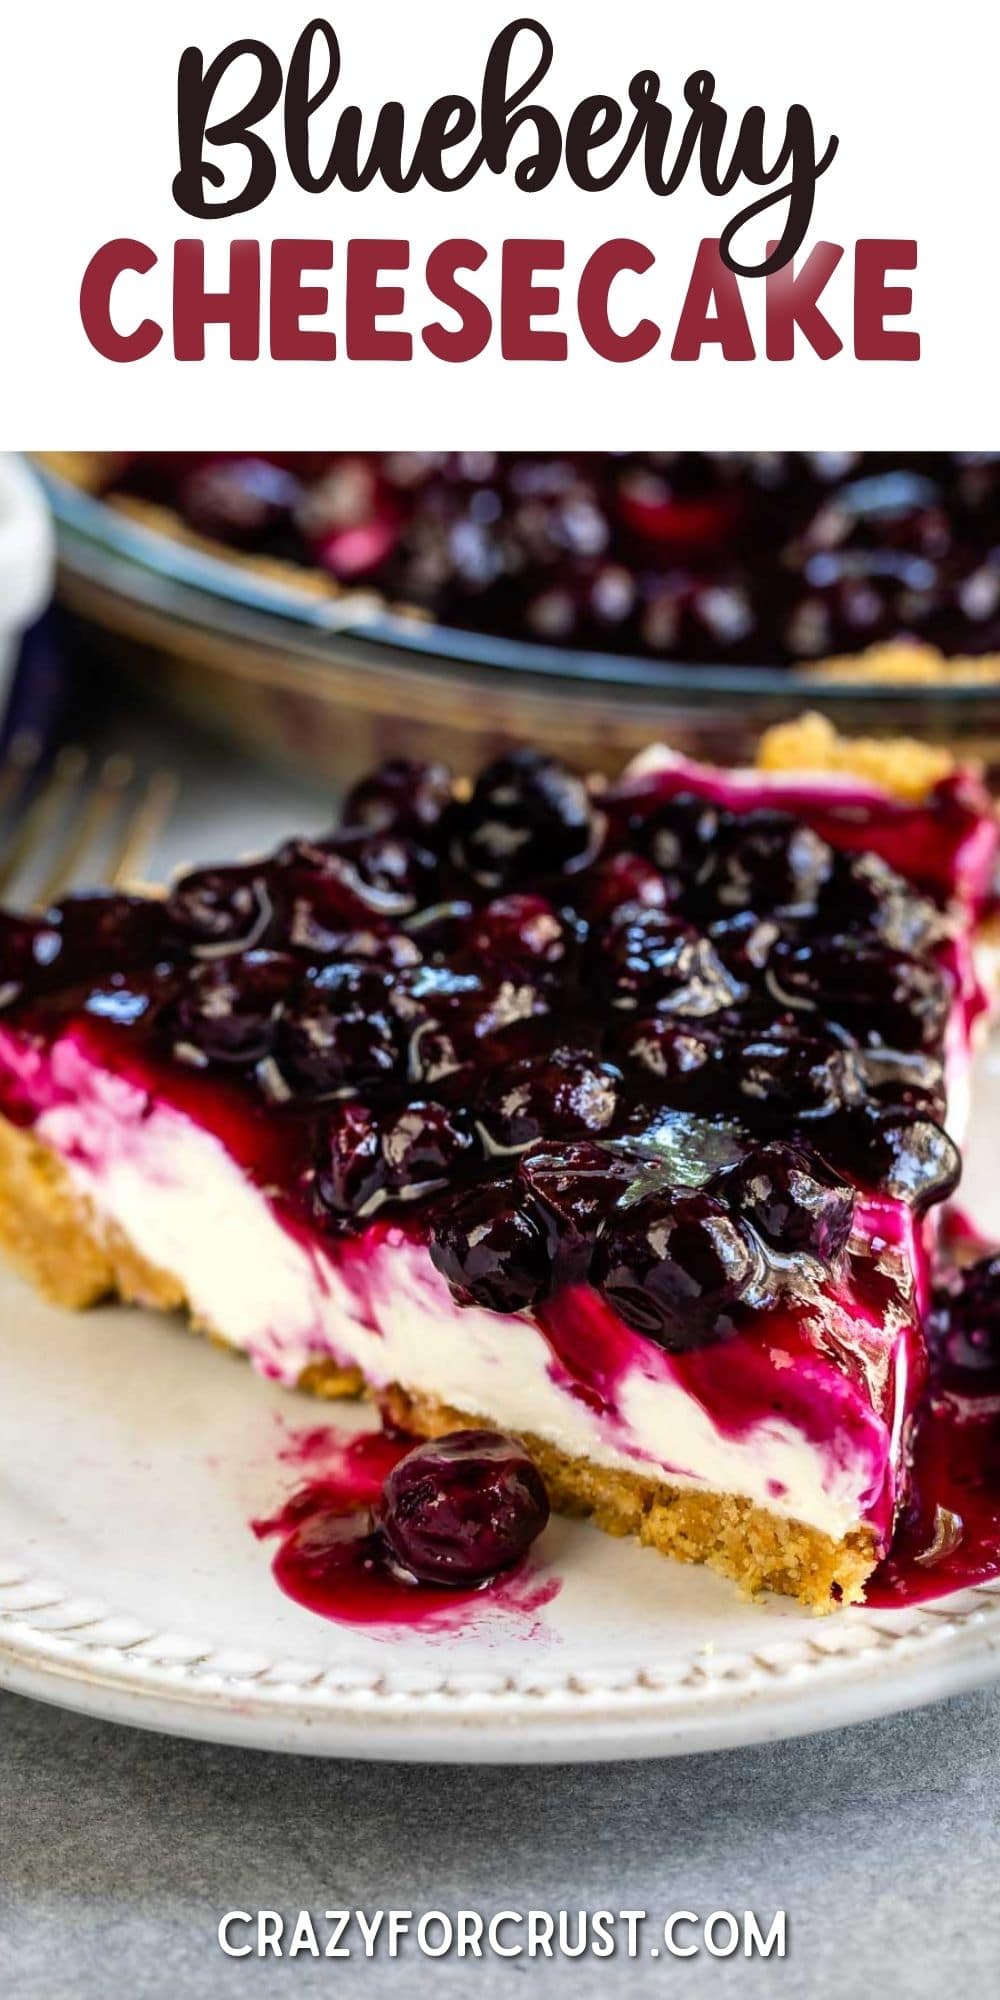 One slice of blueberry cream cheese pie on a plate with rest of pie behind it and recipe title on top of image